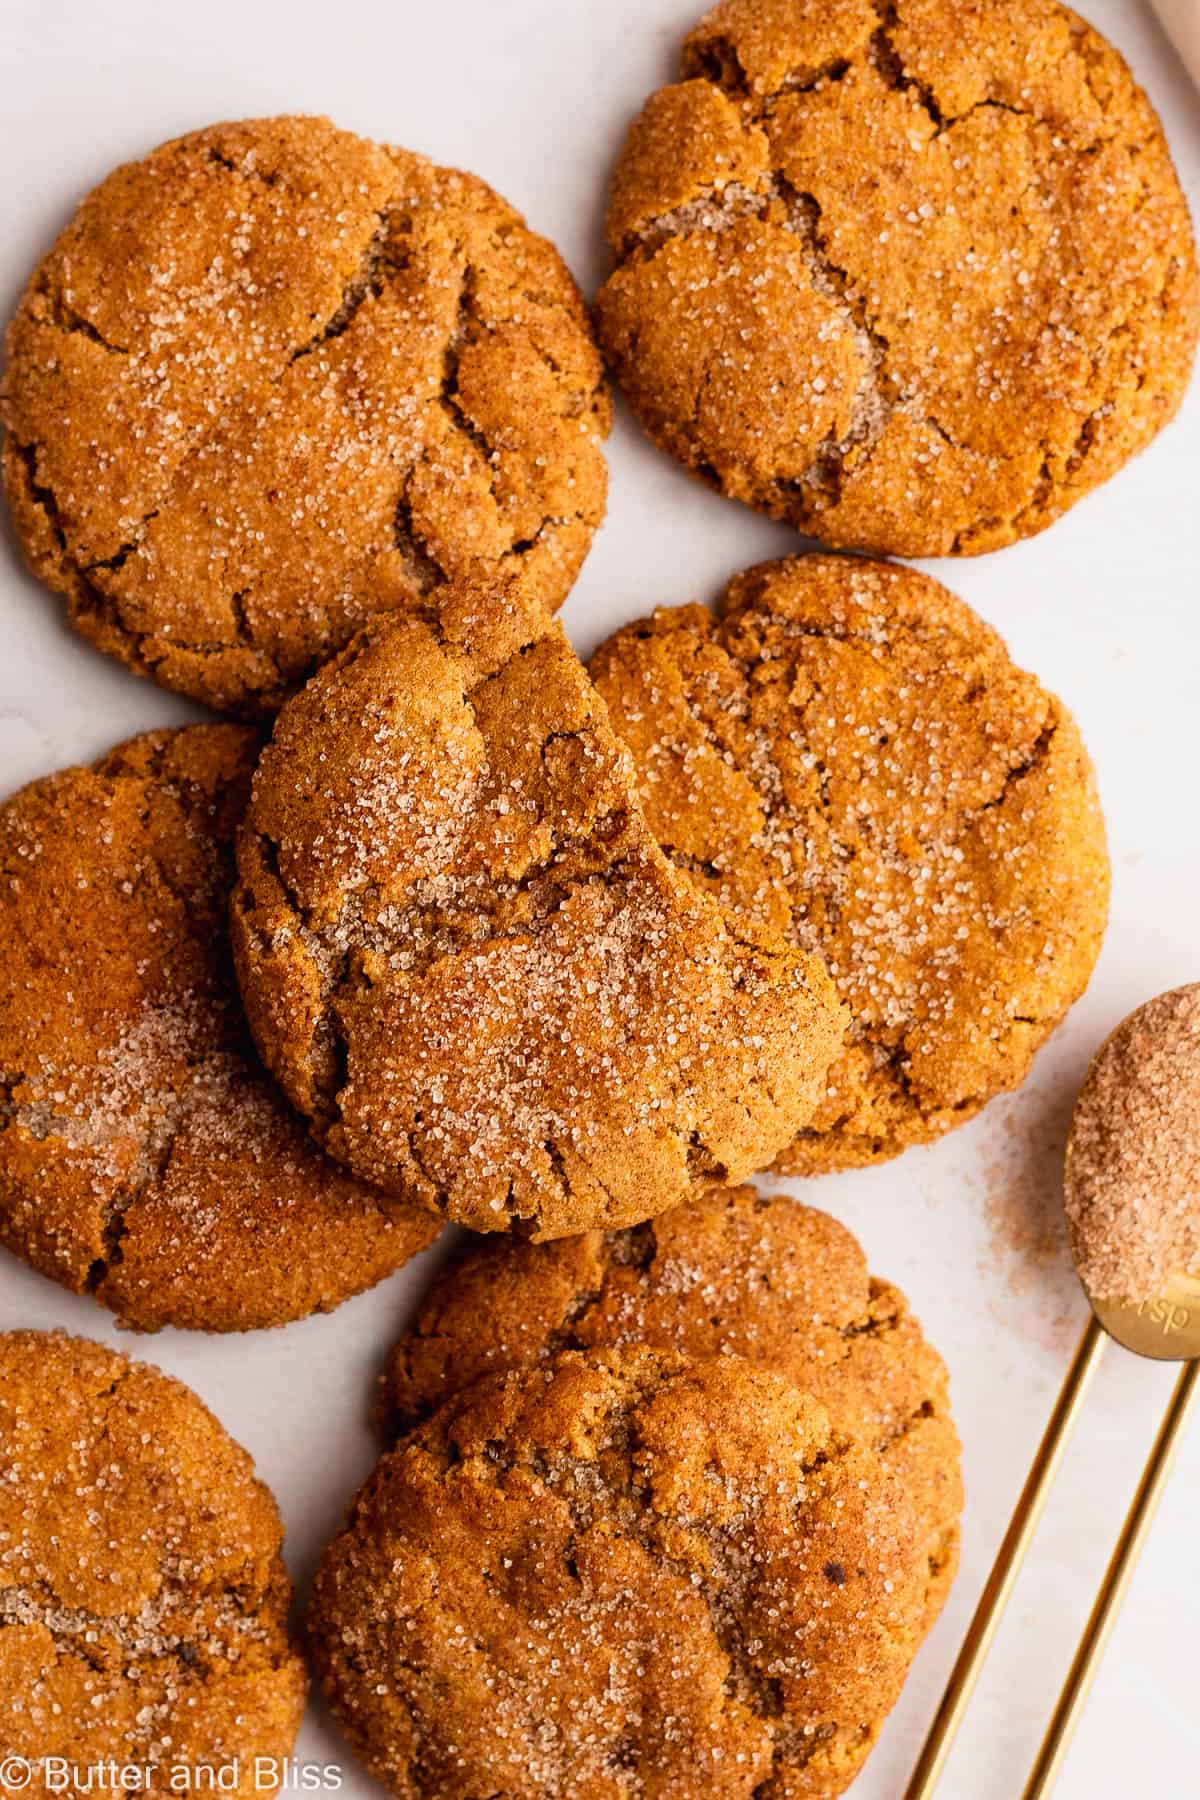 Freshly baked fall spice cookies arranged in a pile on a table with cinnamon sugar.